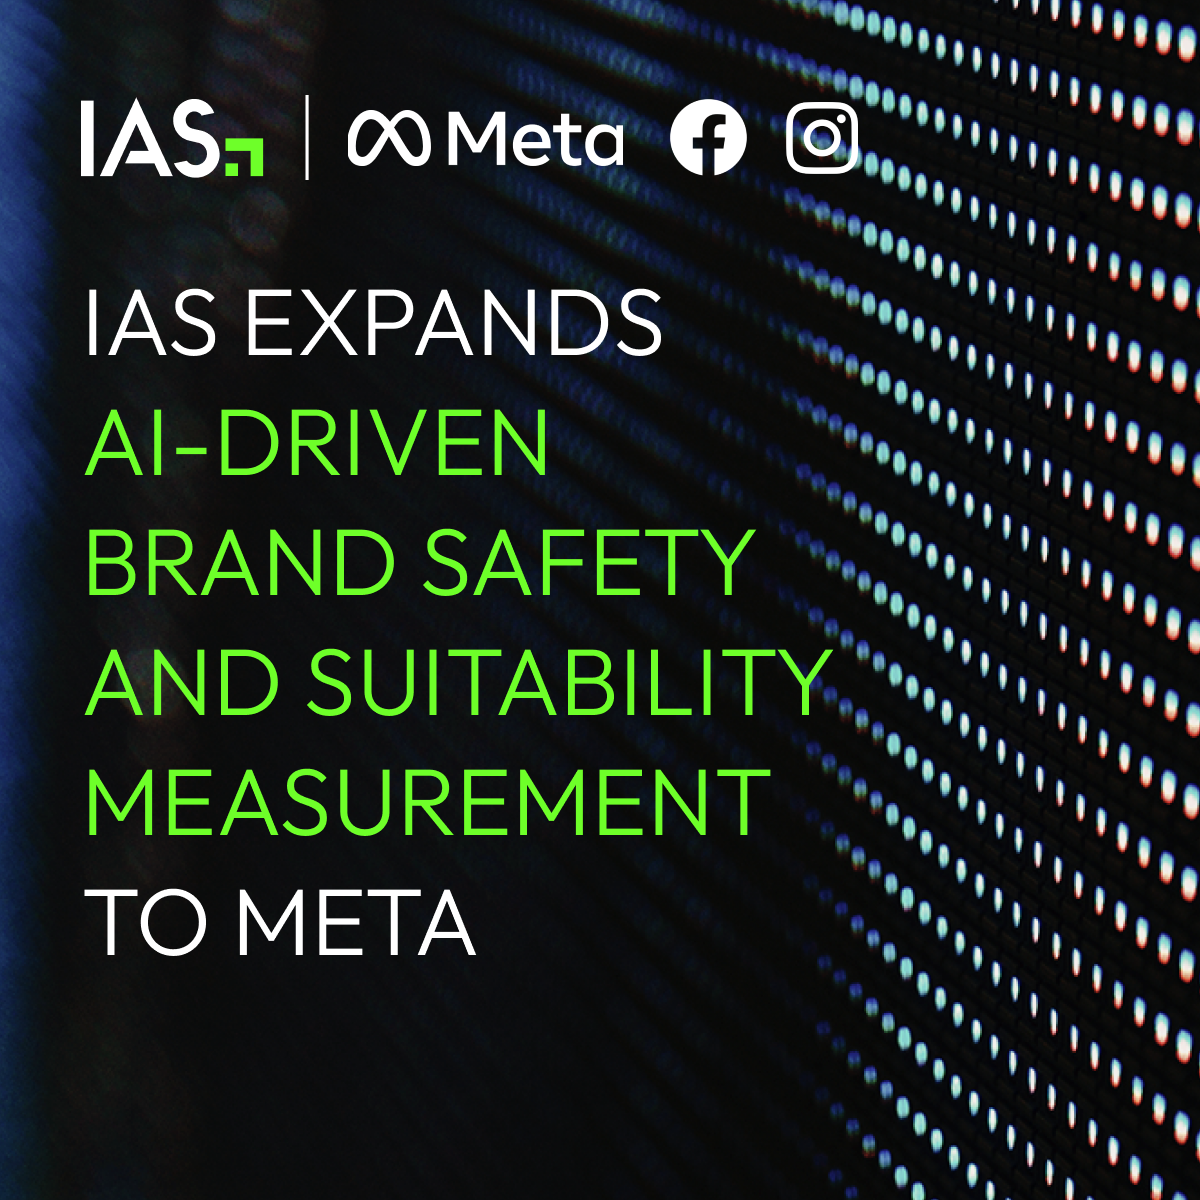 IAS expands brand-safety and suitability partnership with Meta.